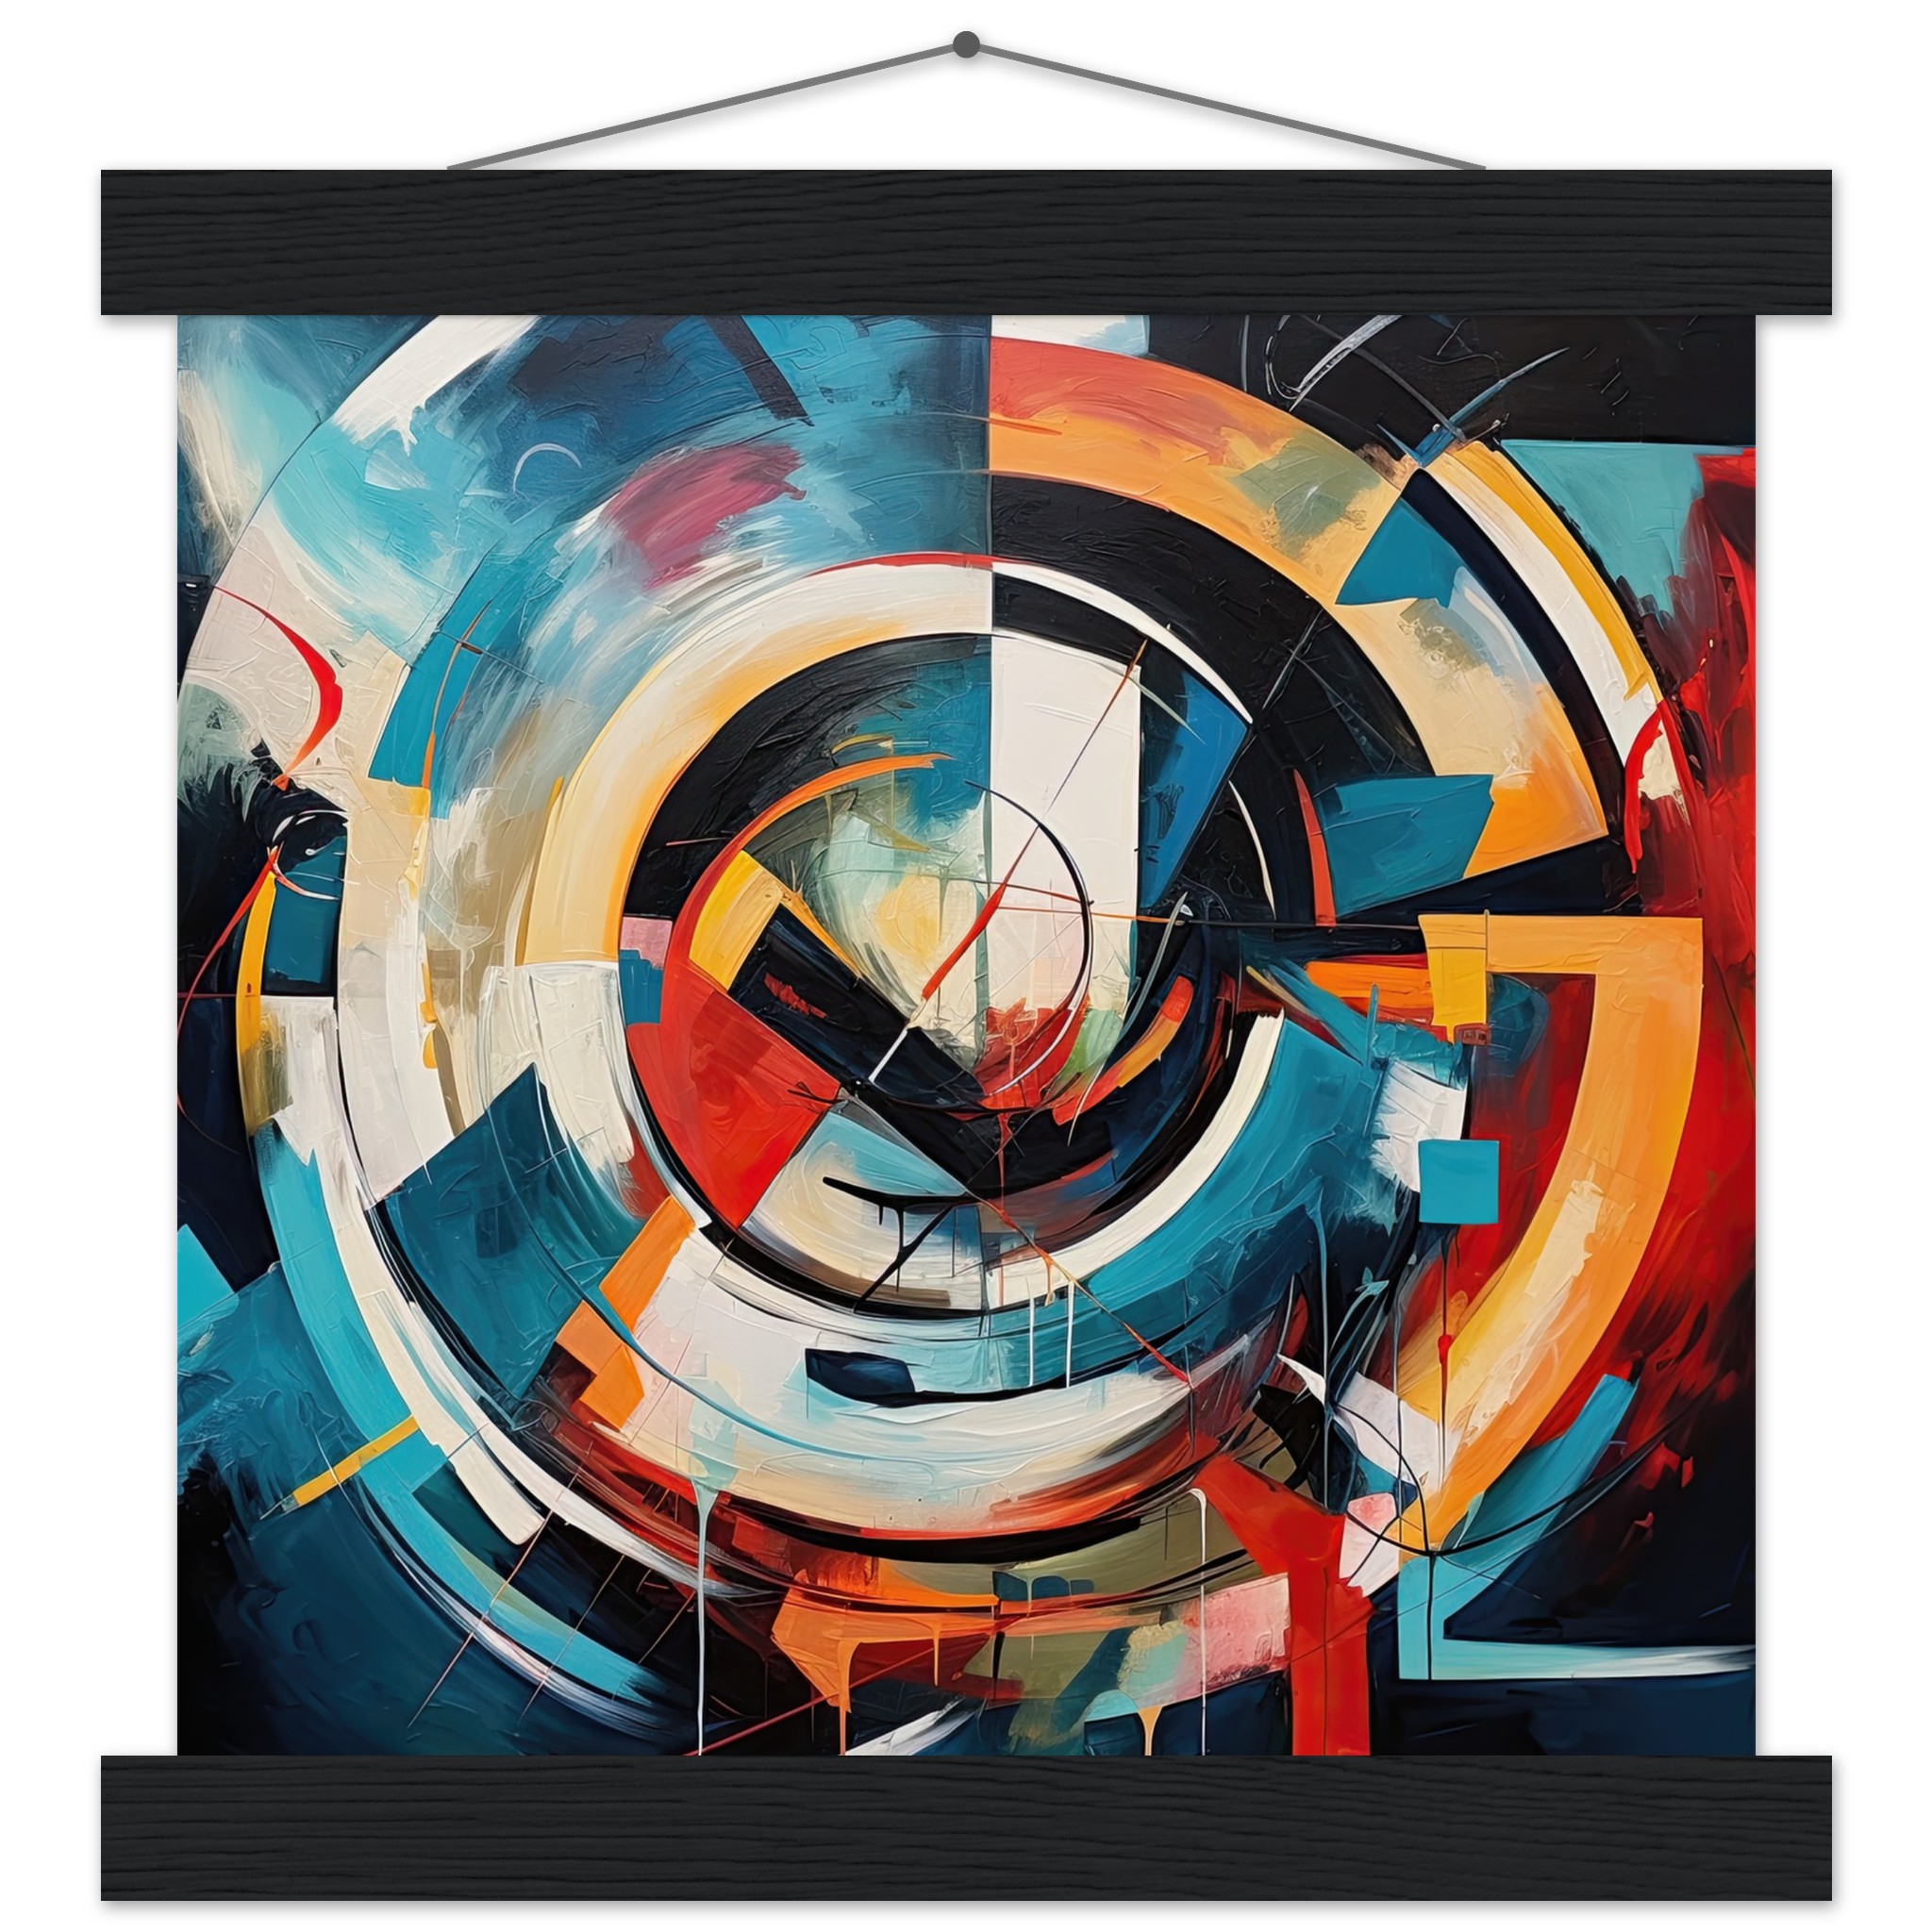 Abstract Colorful Painted Blue Art Print with Hanger – 25×25 cm / 10×10″, Black wall hanger